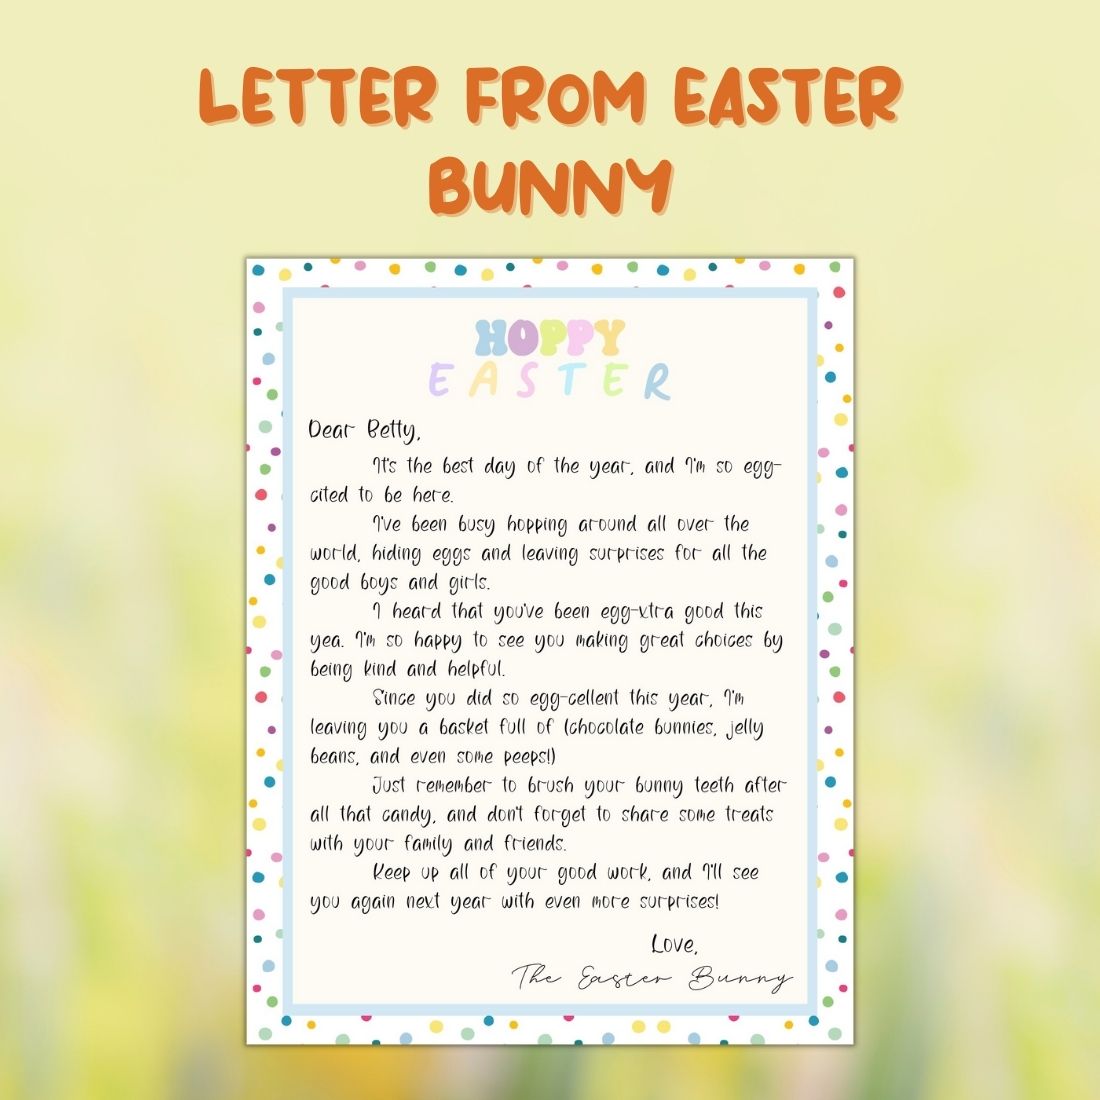 EDITABLE Letter from Easter Bunny preview image.